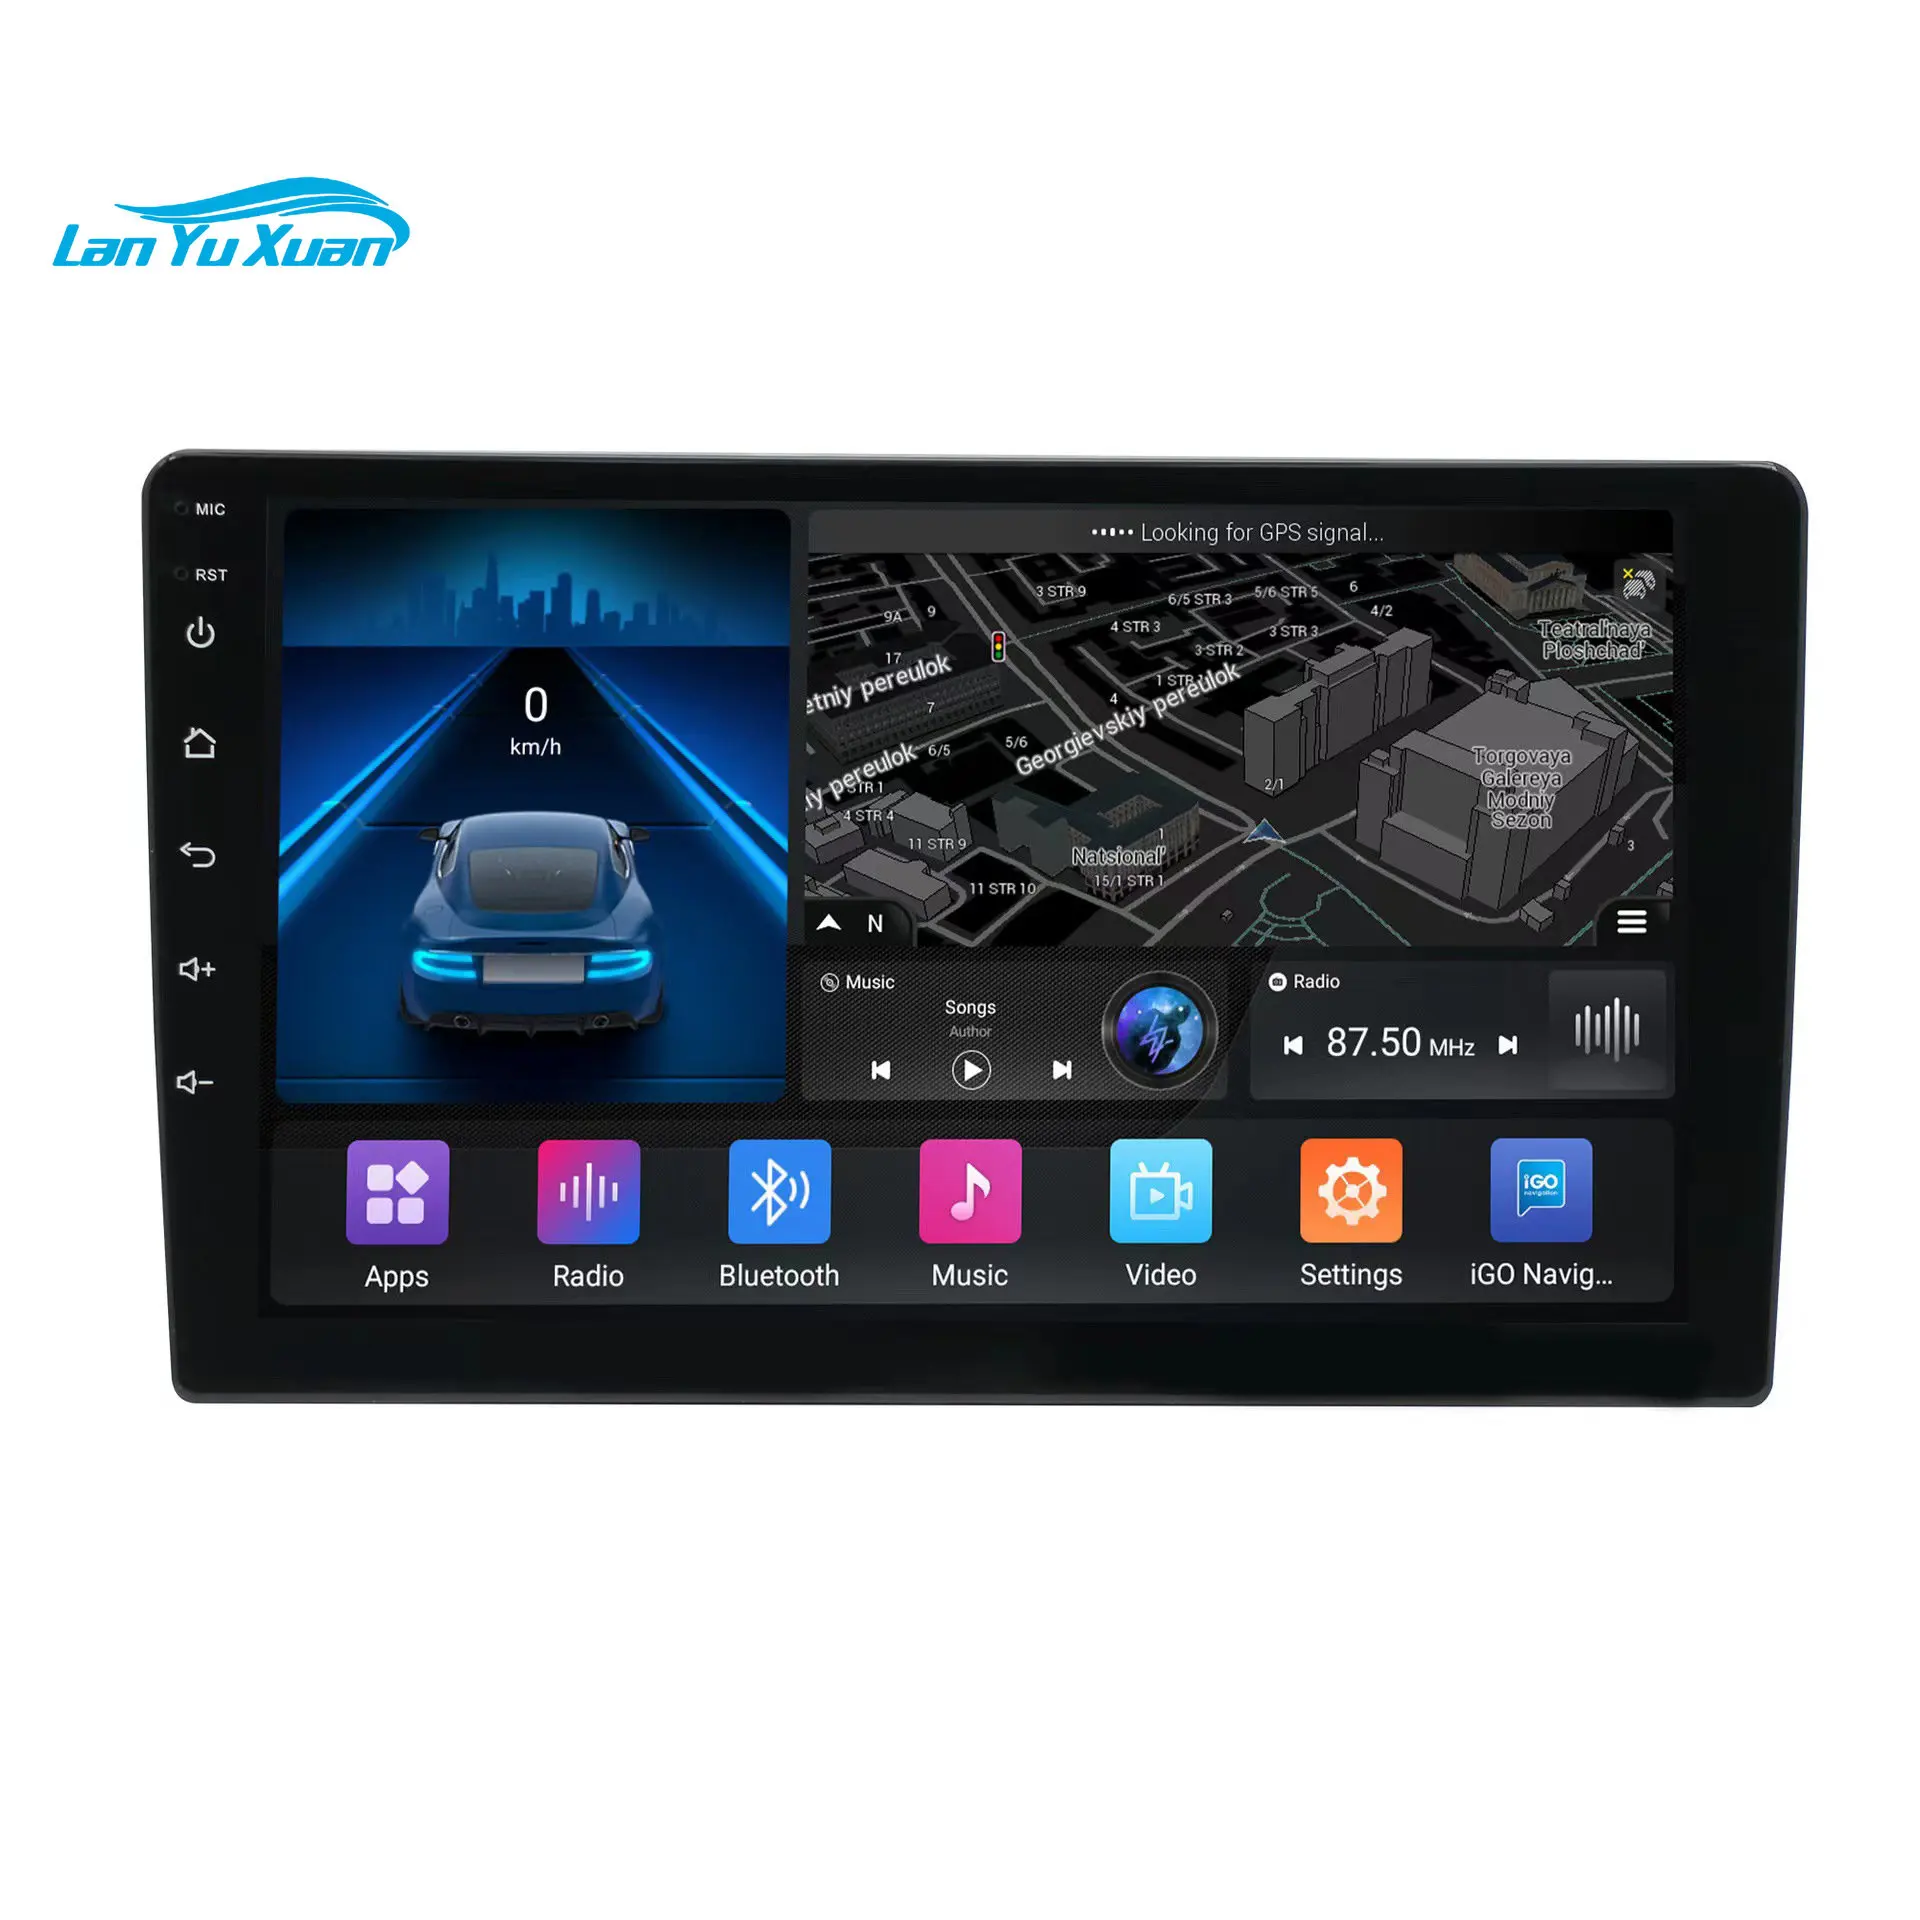 Touch Screen 9inch 10inch 12.3 inch 4G WIFI GPS Stereo Radio Navigation System o Auto mp5 player for car 7 inch car stereo mp5 player bt hands free calling fm radio